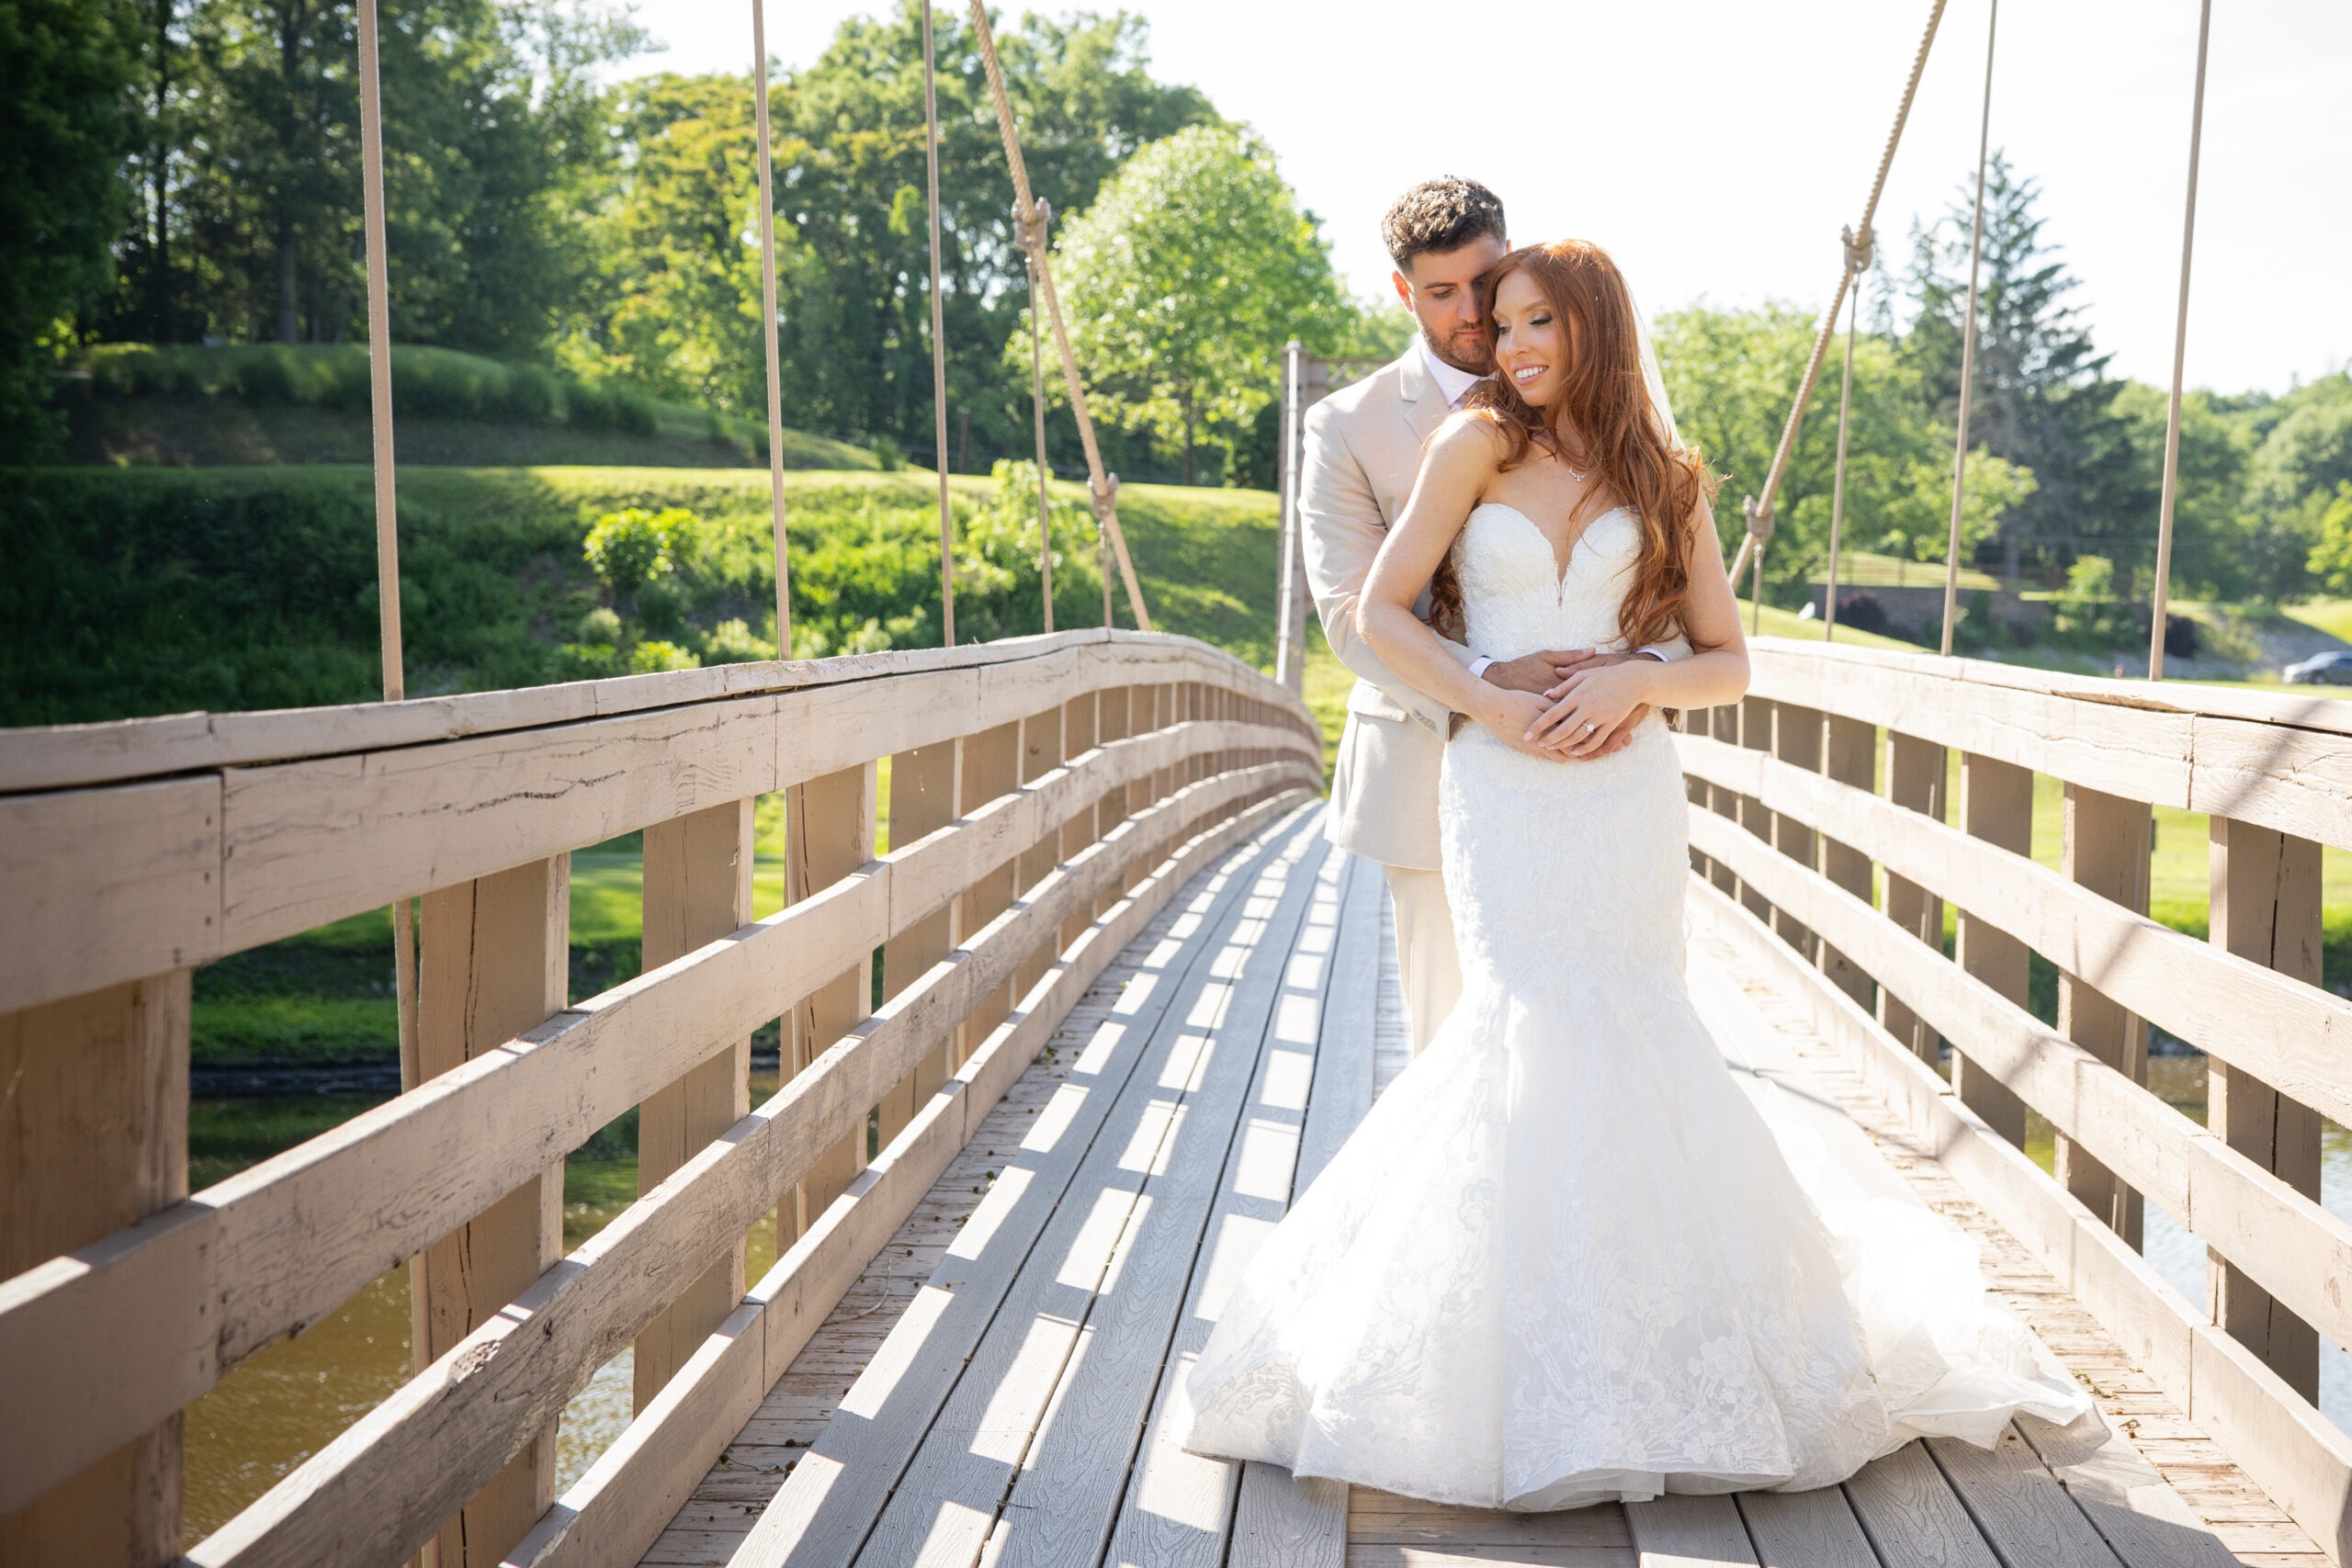 Bride and Groom Portrait at West Hills Country Club Hudson Valley, NY.